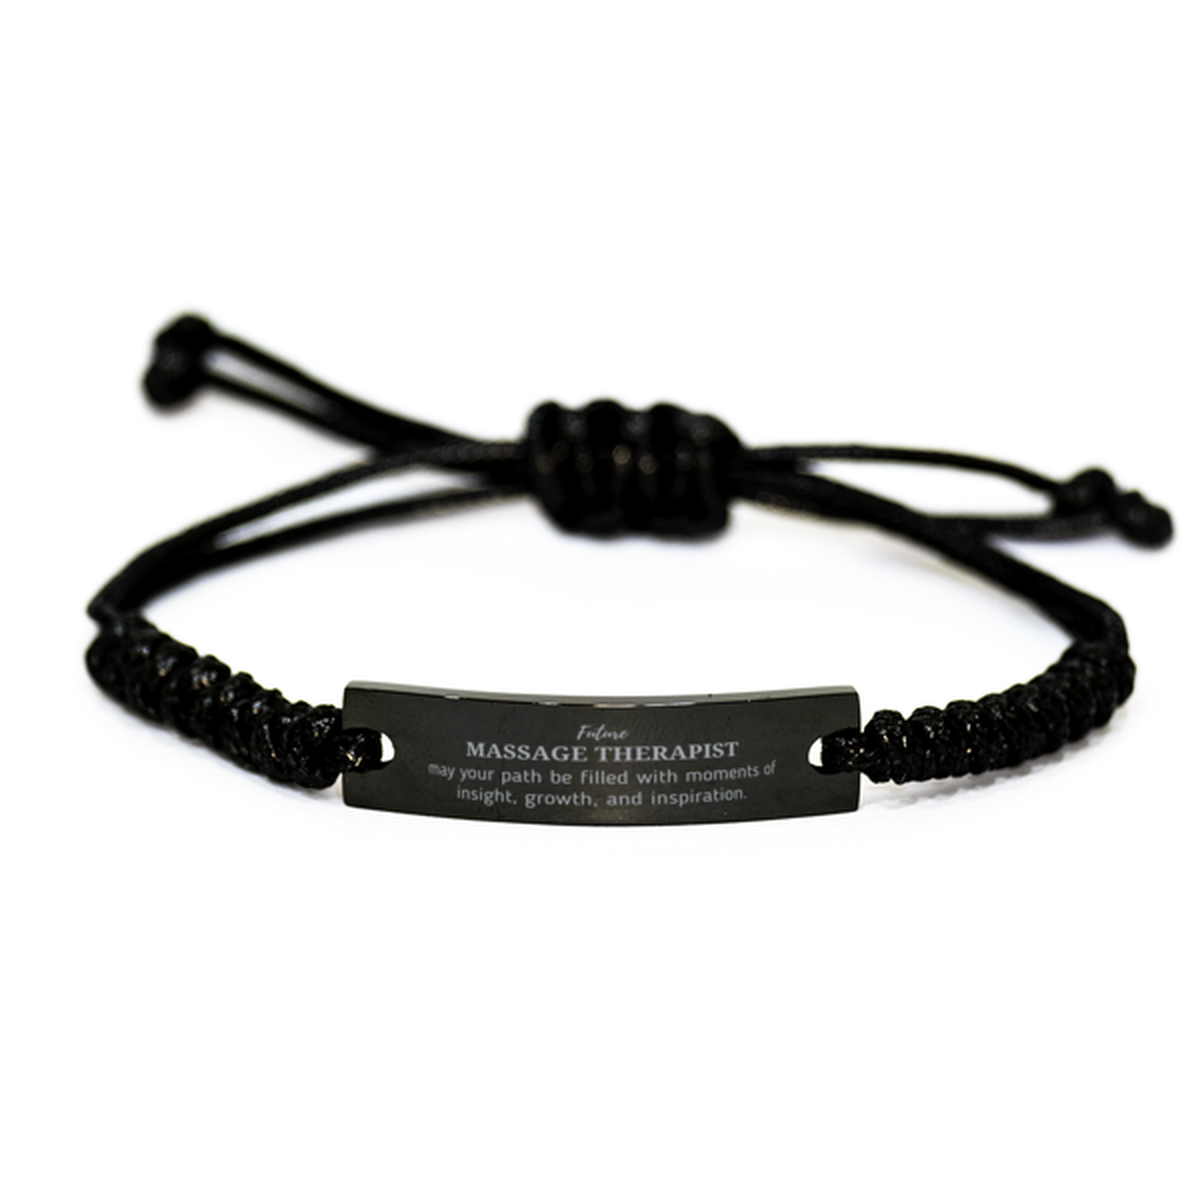 Future Massage Therapist Gifts, May your path be filled with moments of insight, Graduation Gifts for New Massage Therapist, Christmas Unique Black Rope Bracelet For Men, Women, Friends